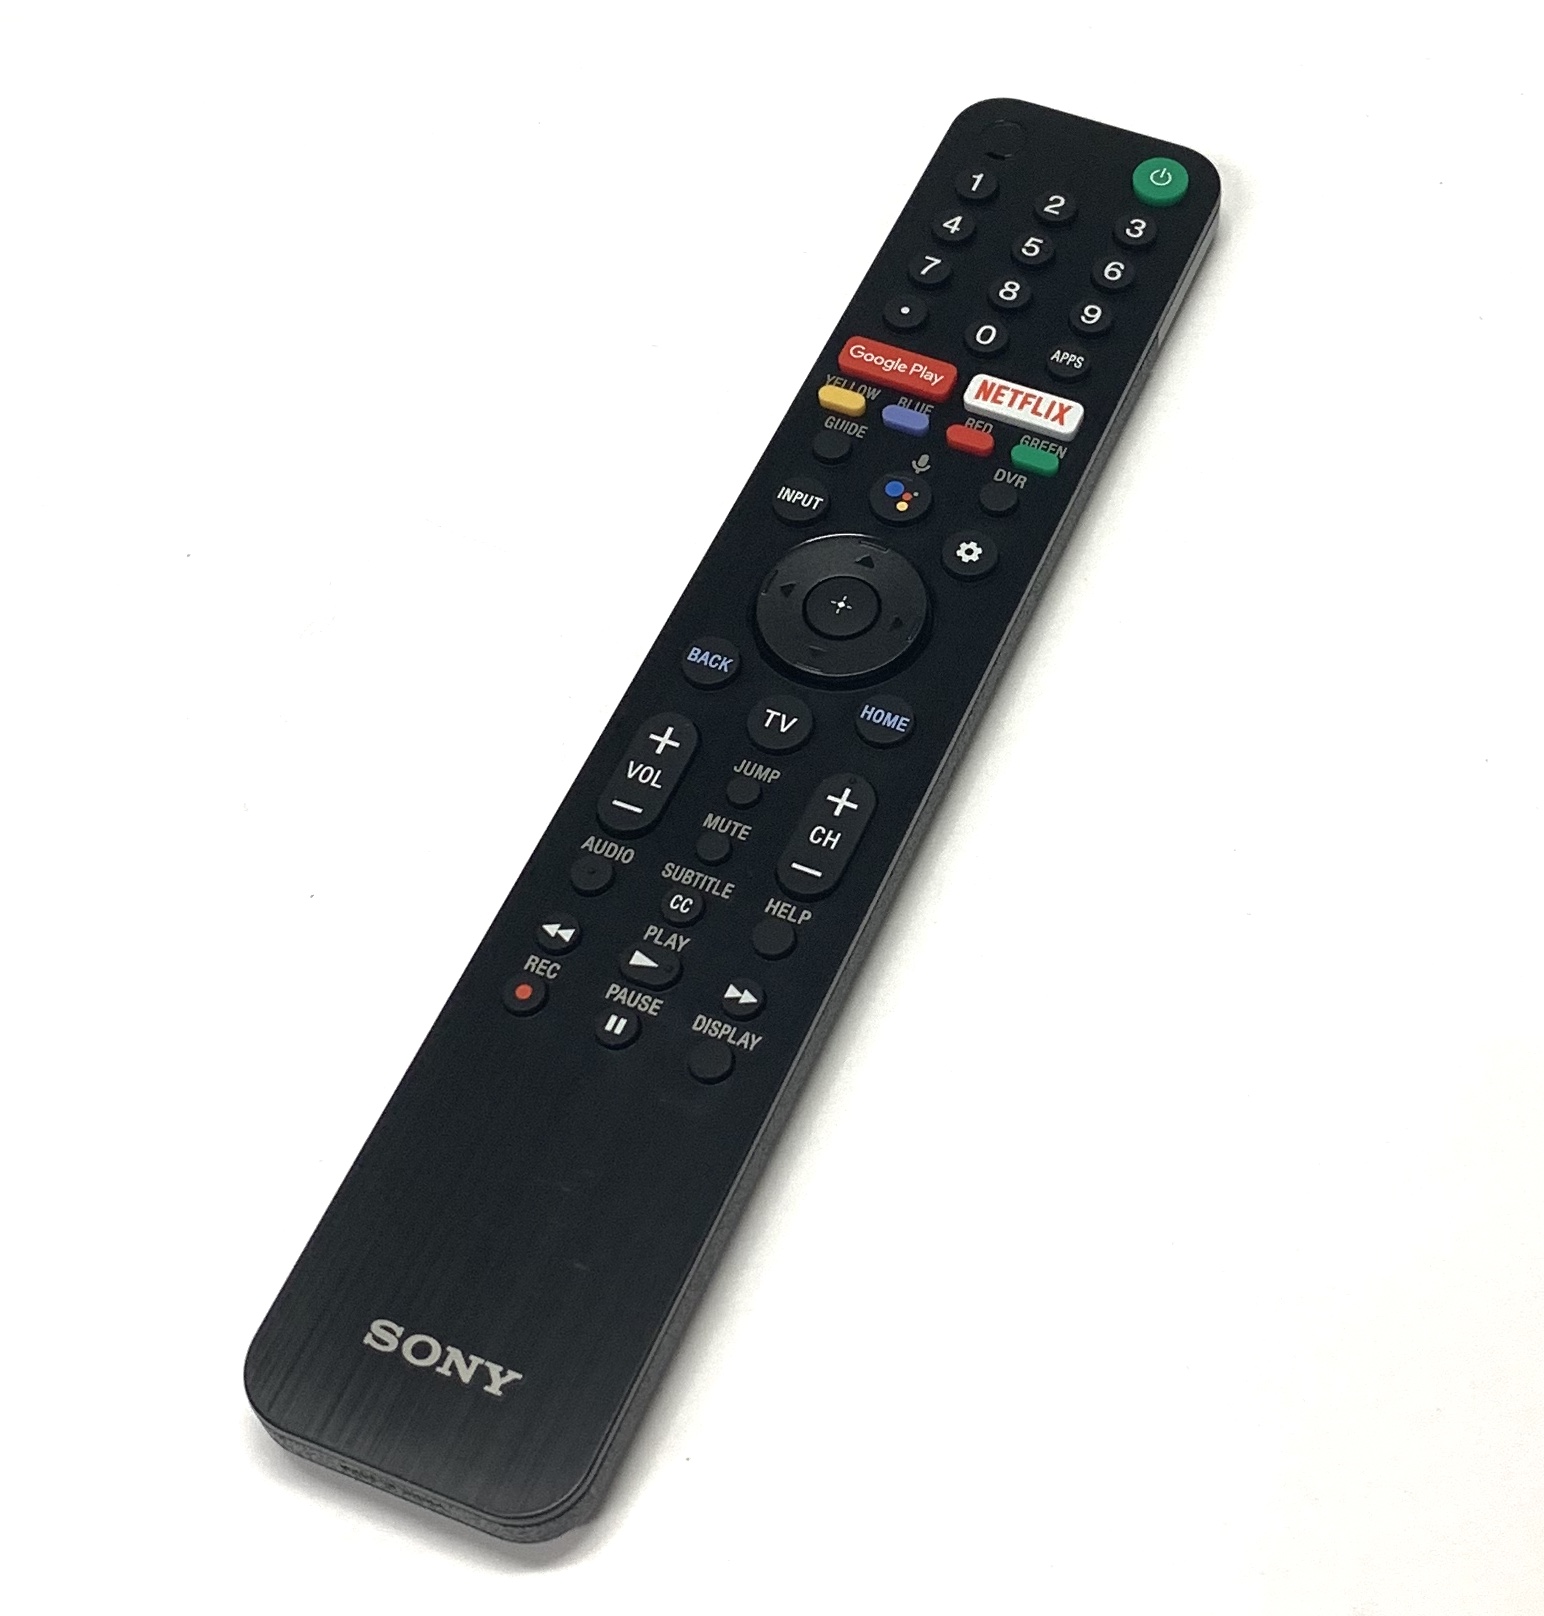 Sony OEM Sony Remote Control Specifically For XBR-55X930E, XBR60X830F, XBR-60X830F, XBR65A1E, XBR-65A1E